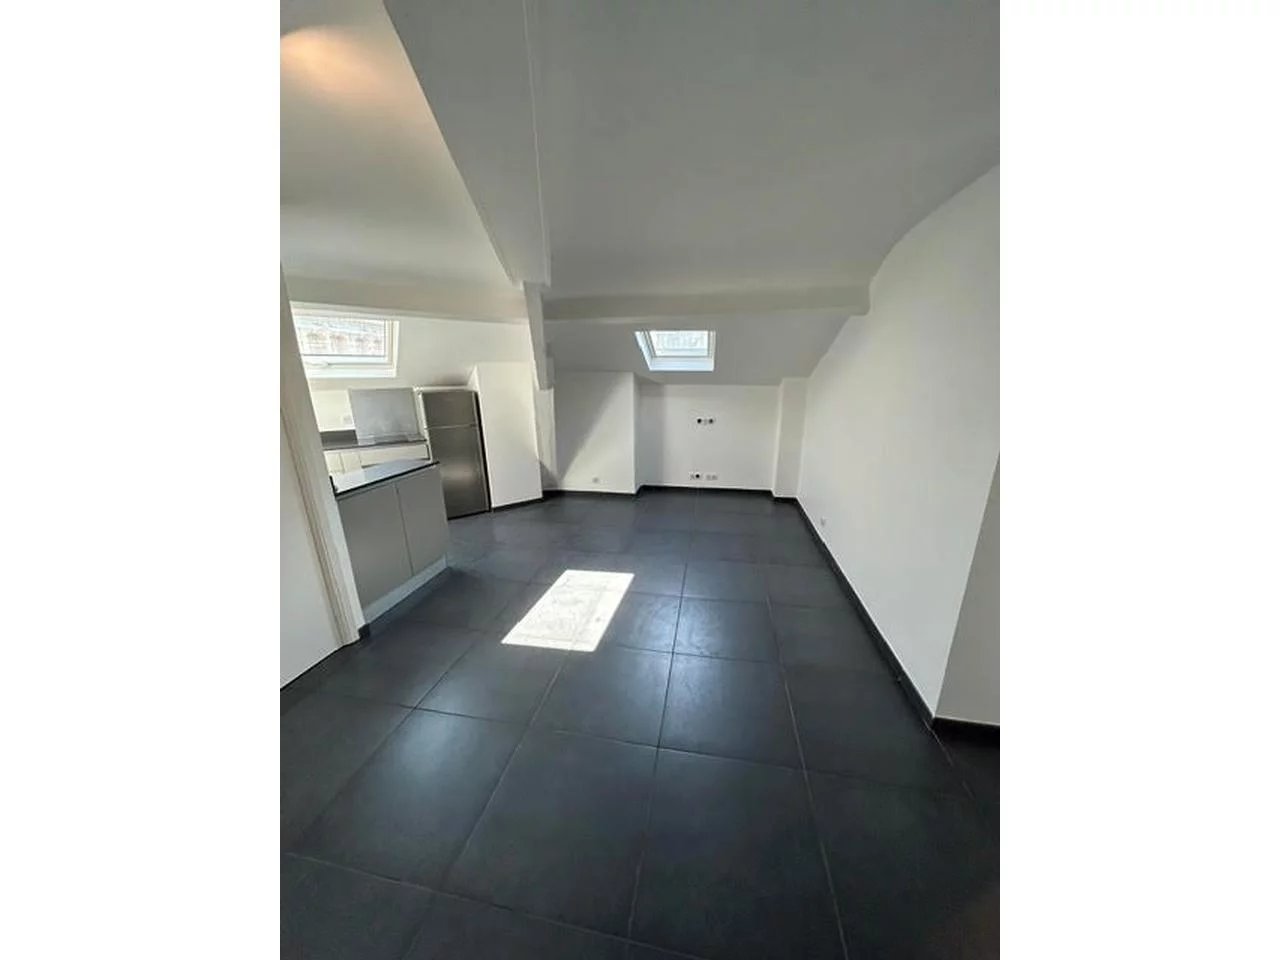 Appartement  2 Rooms 32m2  for sale   245 000 €